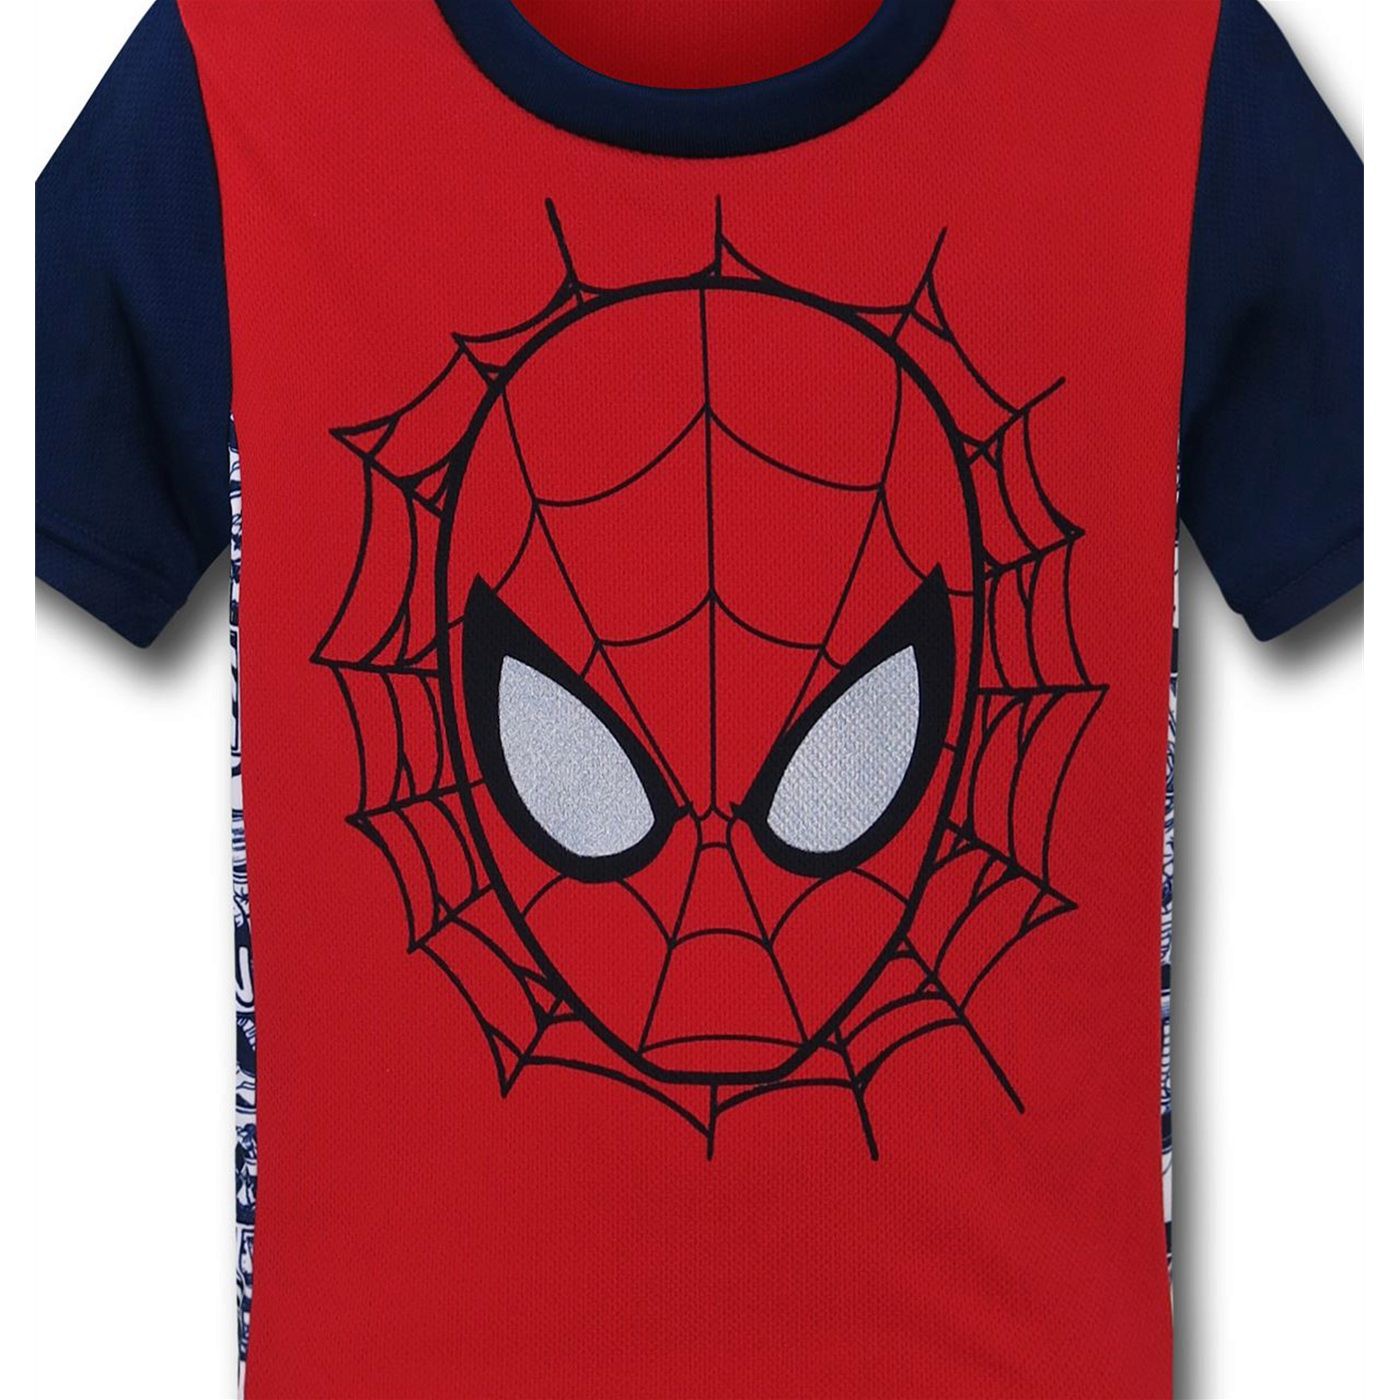 Spiderman Face Two-Tone Kids T-Shirt